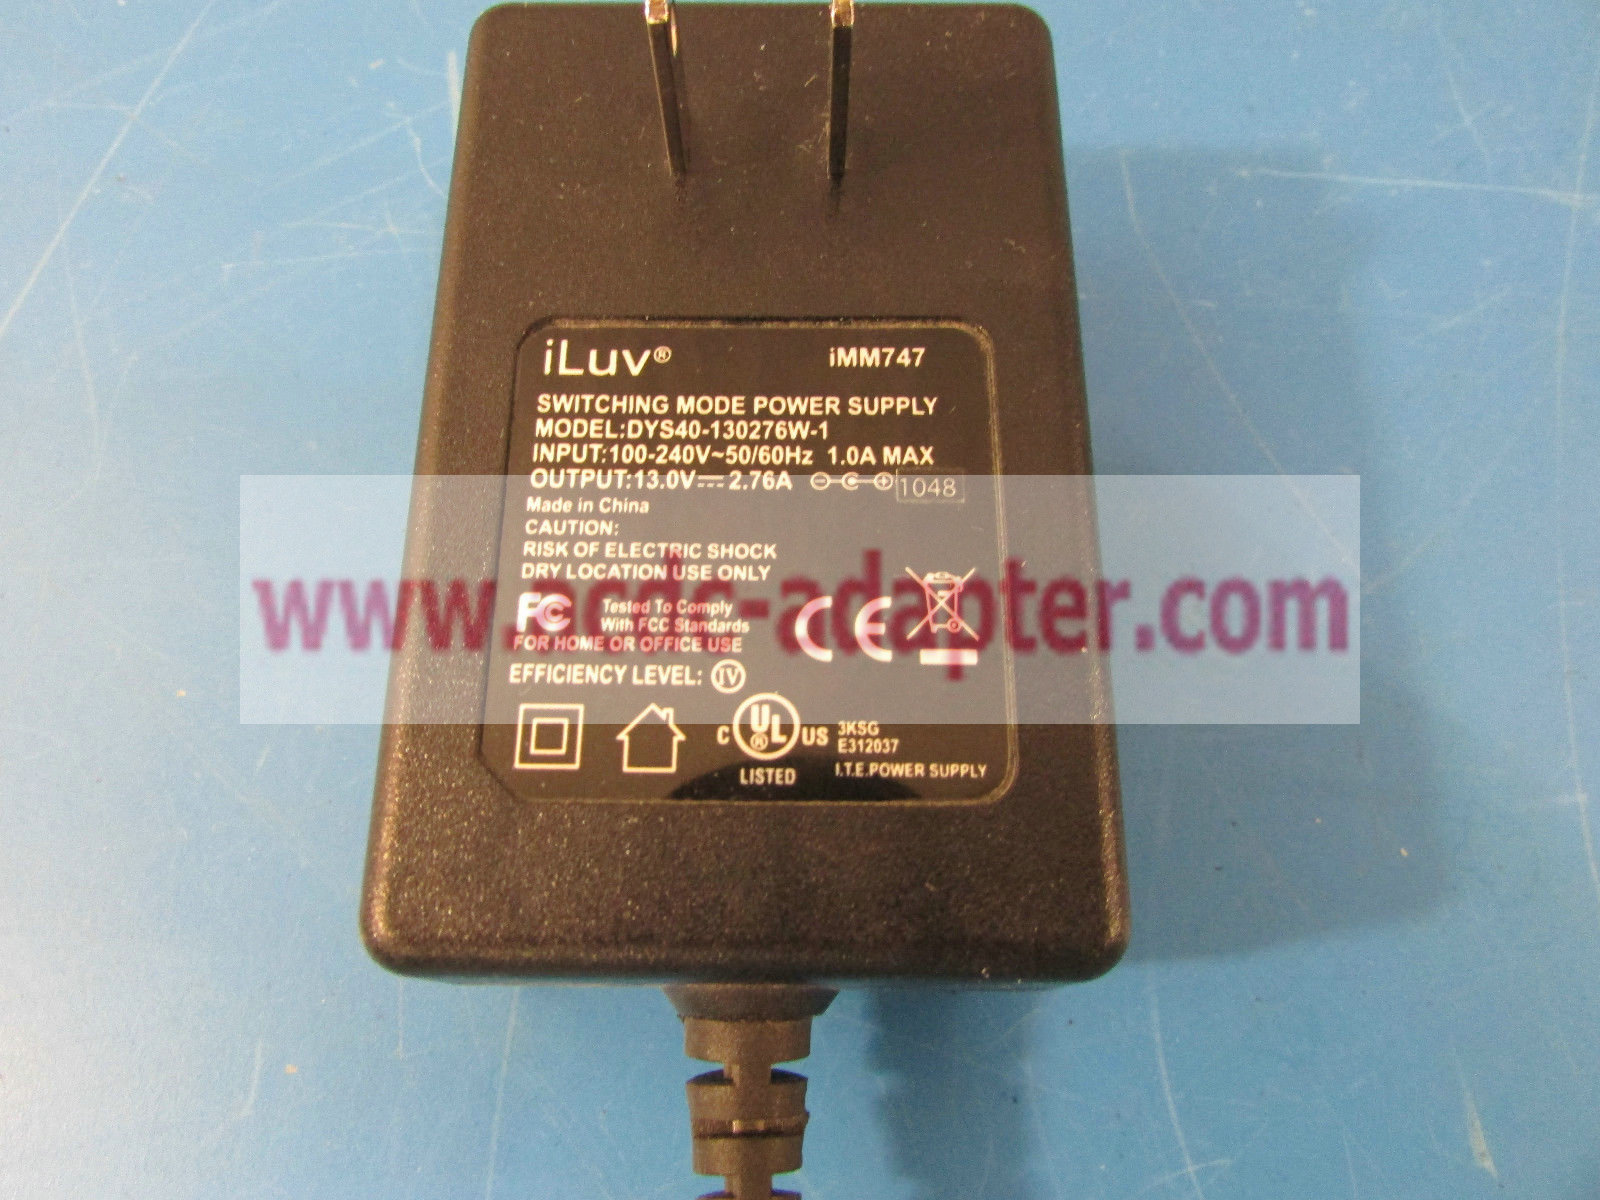 New iLuv DYS40-130276W-1 iMM747 13V 2.76A AC/DC Switching Power Supply Adapter - Click Image to Close